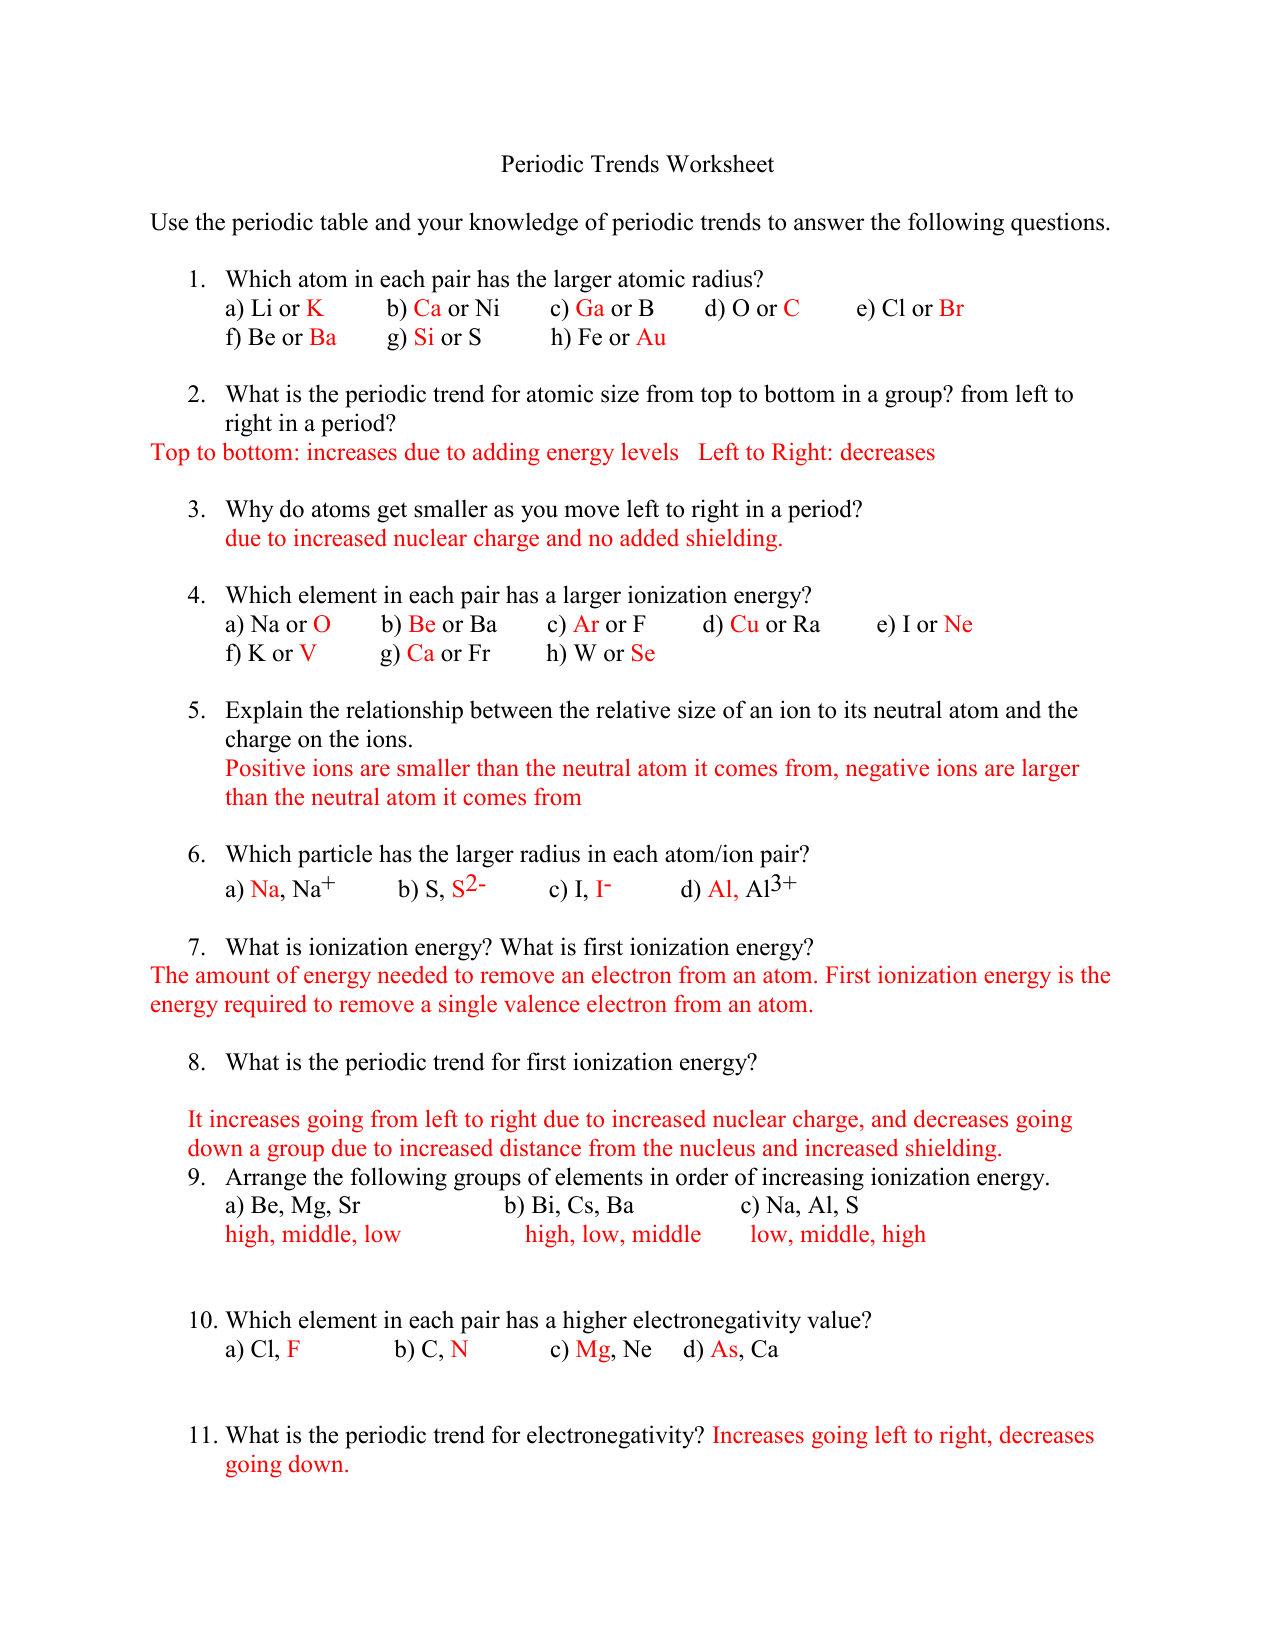 Periodic Trends Worksheet 11 answers Within Periodic Trends Worksheet Answer Key